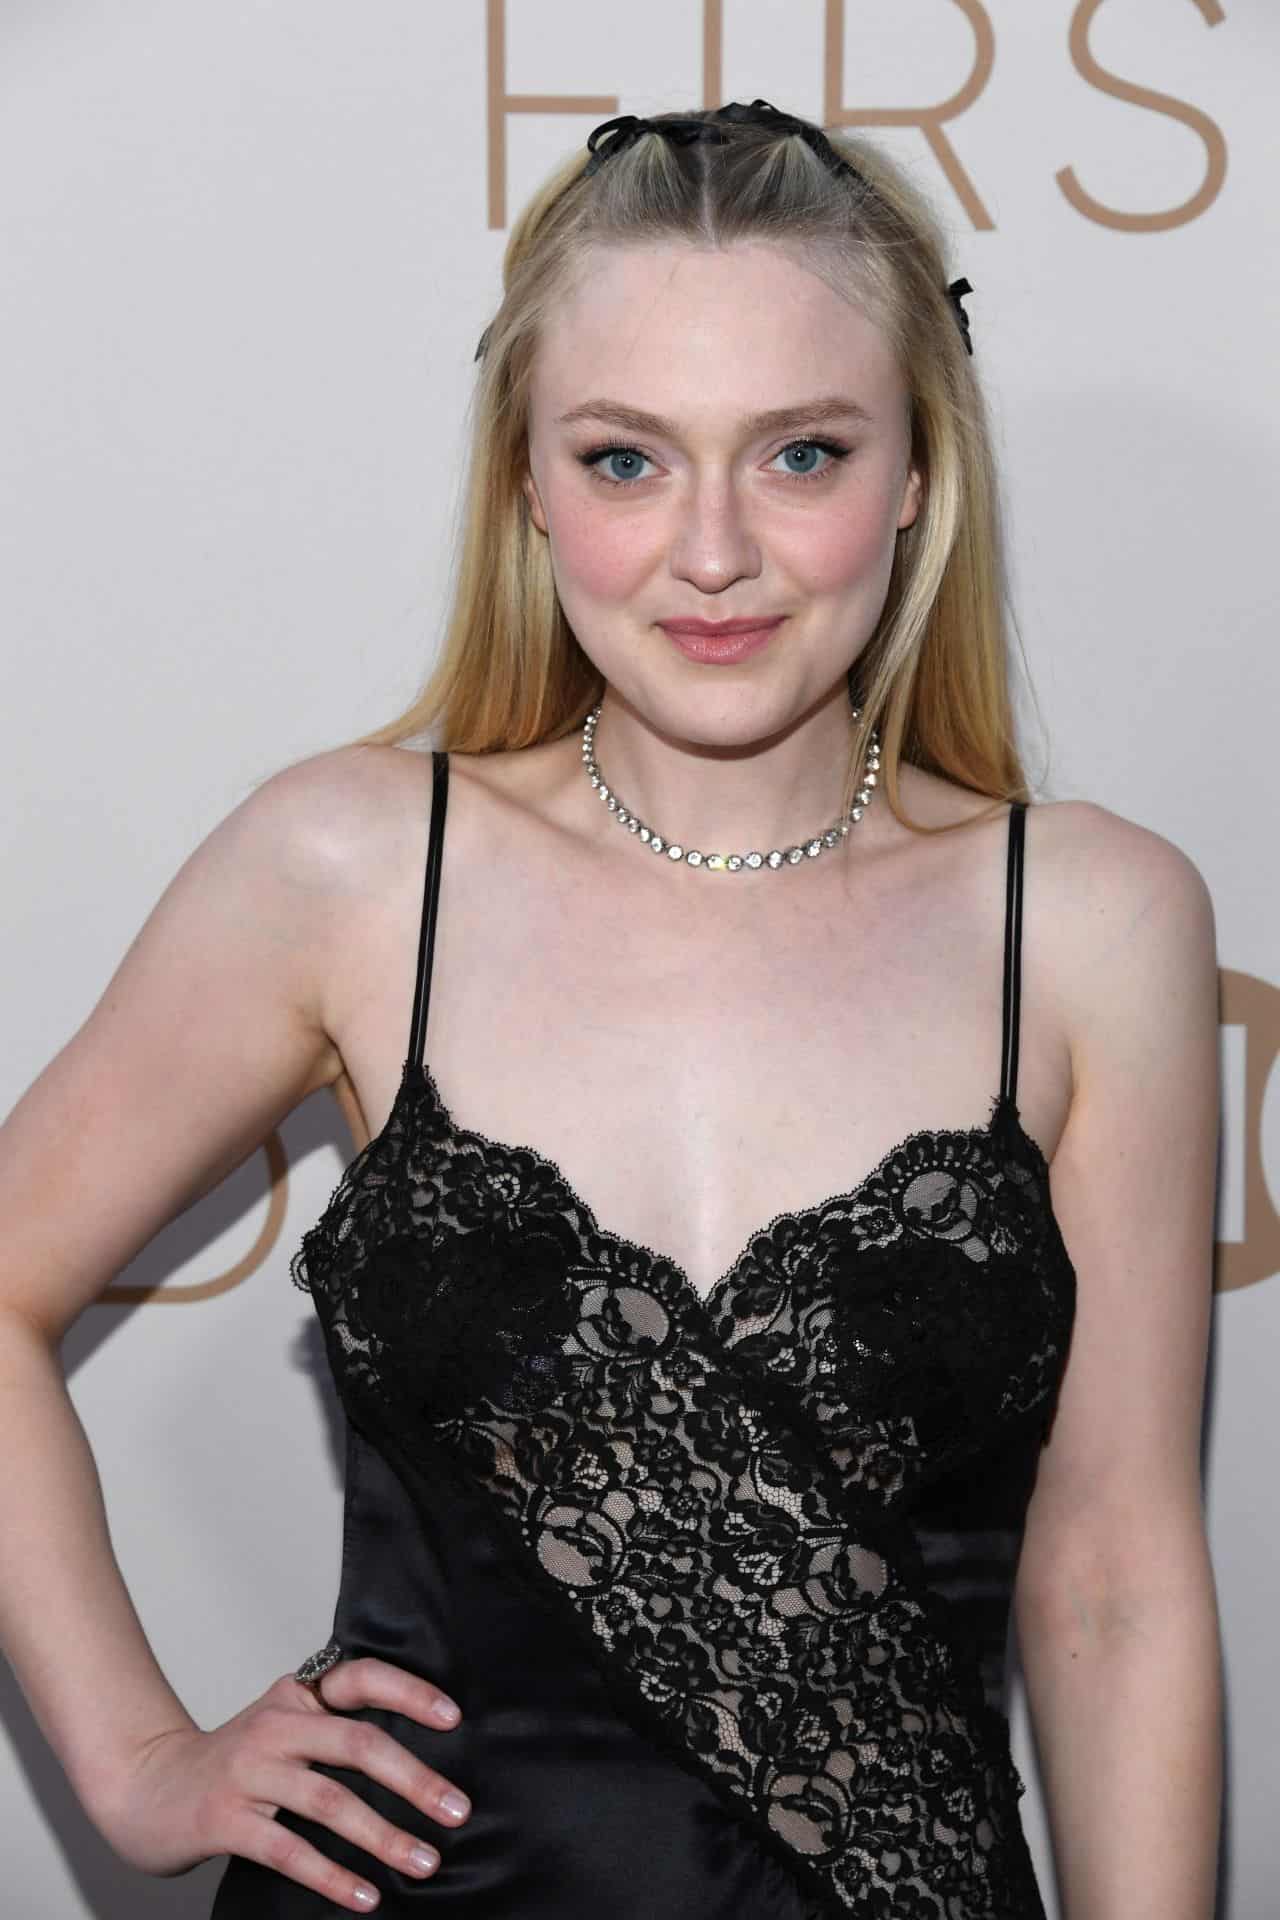 Dakota Fanning Wore a Black Sheer Dress at The First Lady Premiere in LA